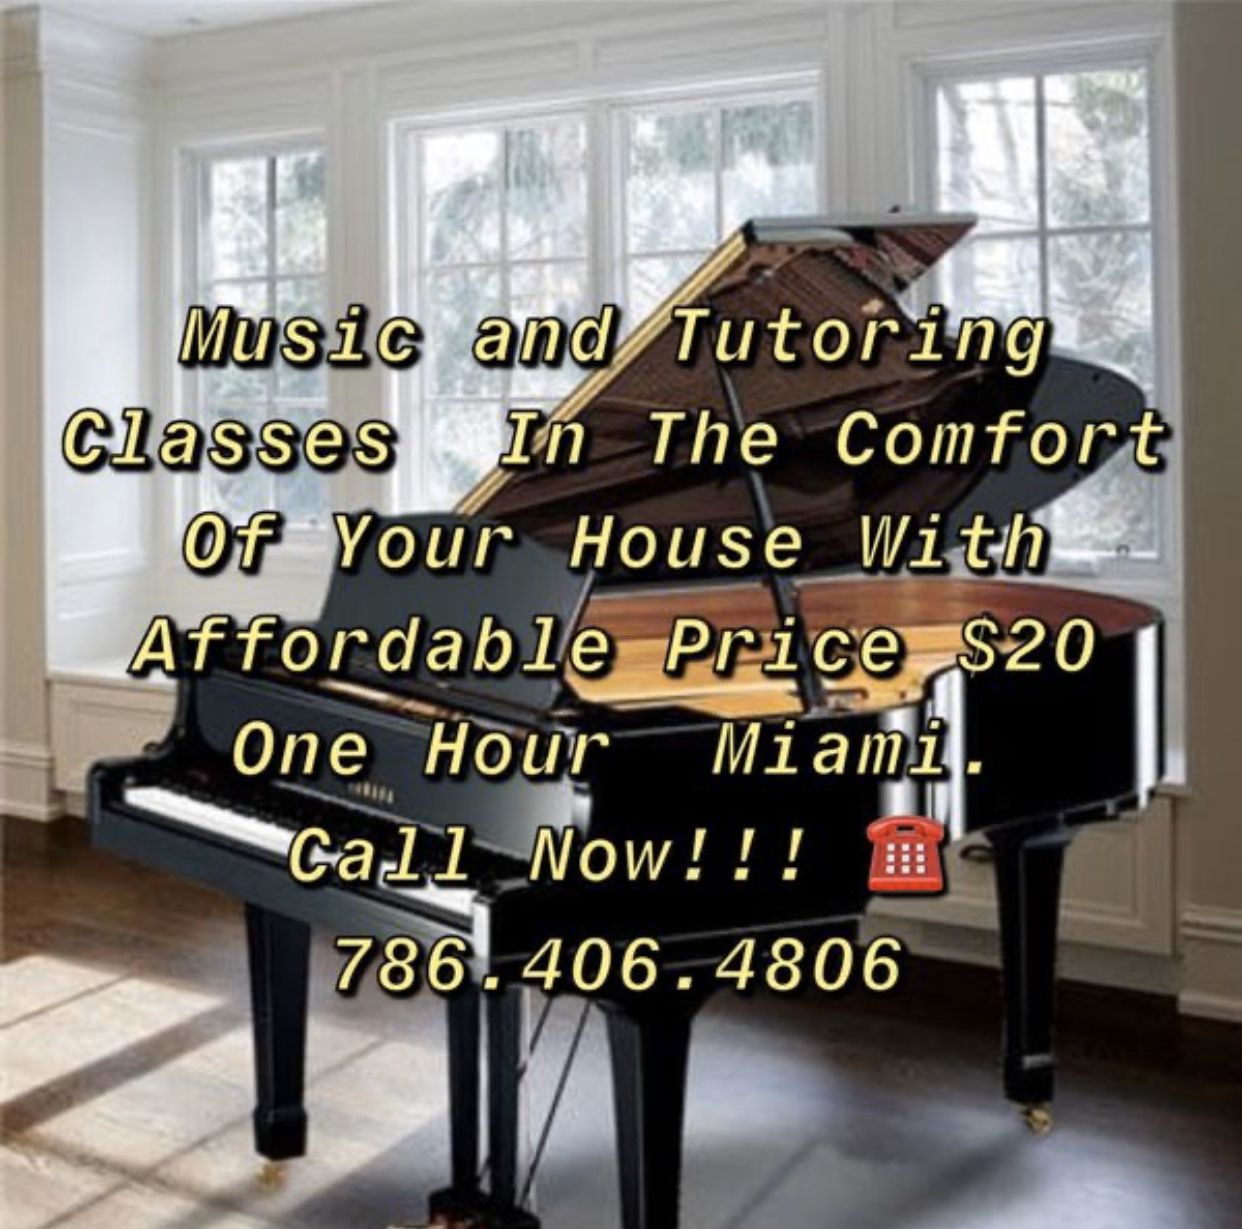 MUSIC AND TUTORING CLASSES